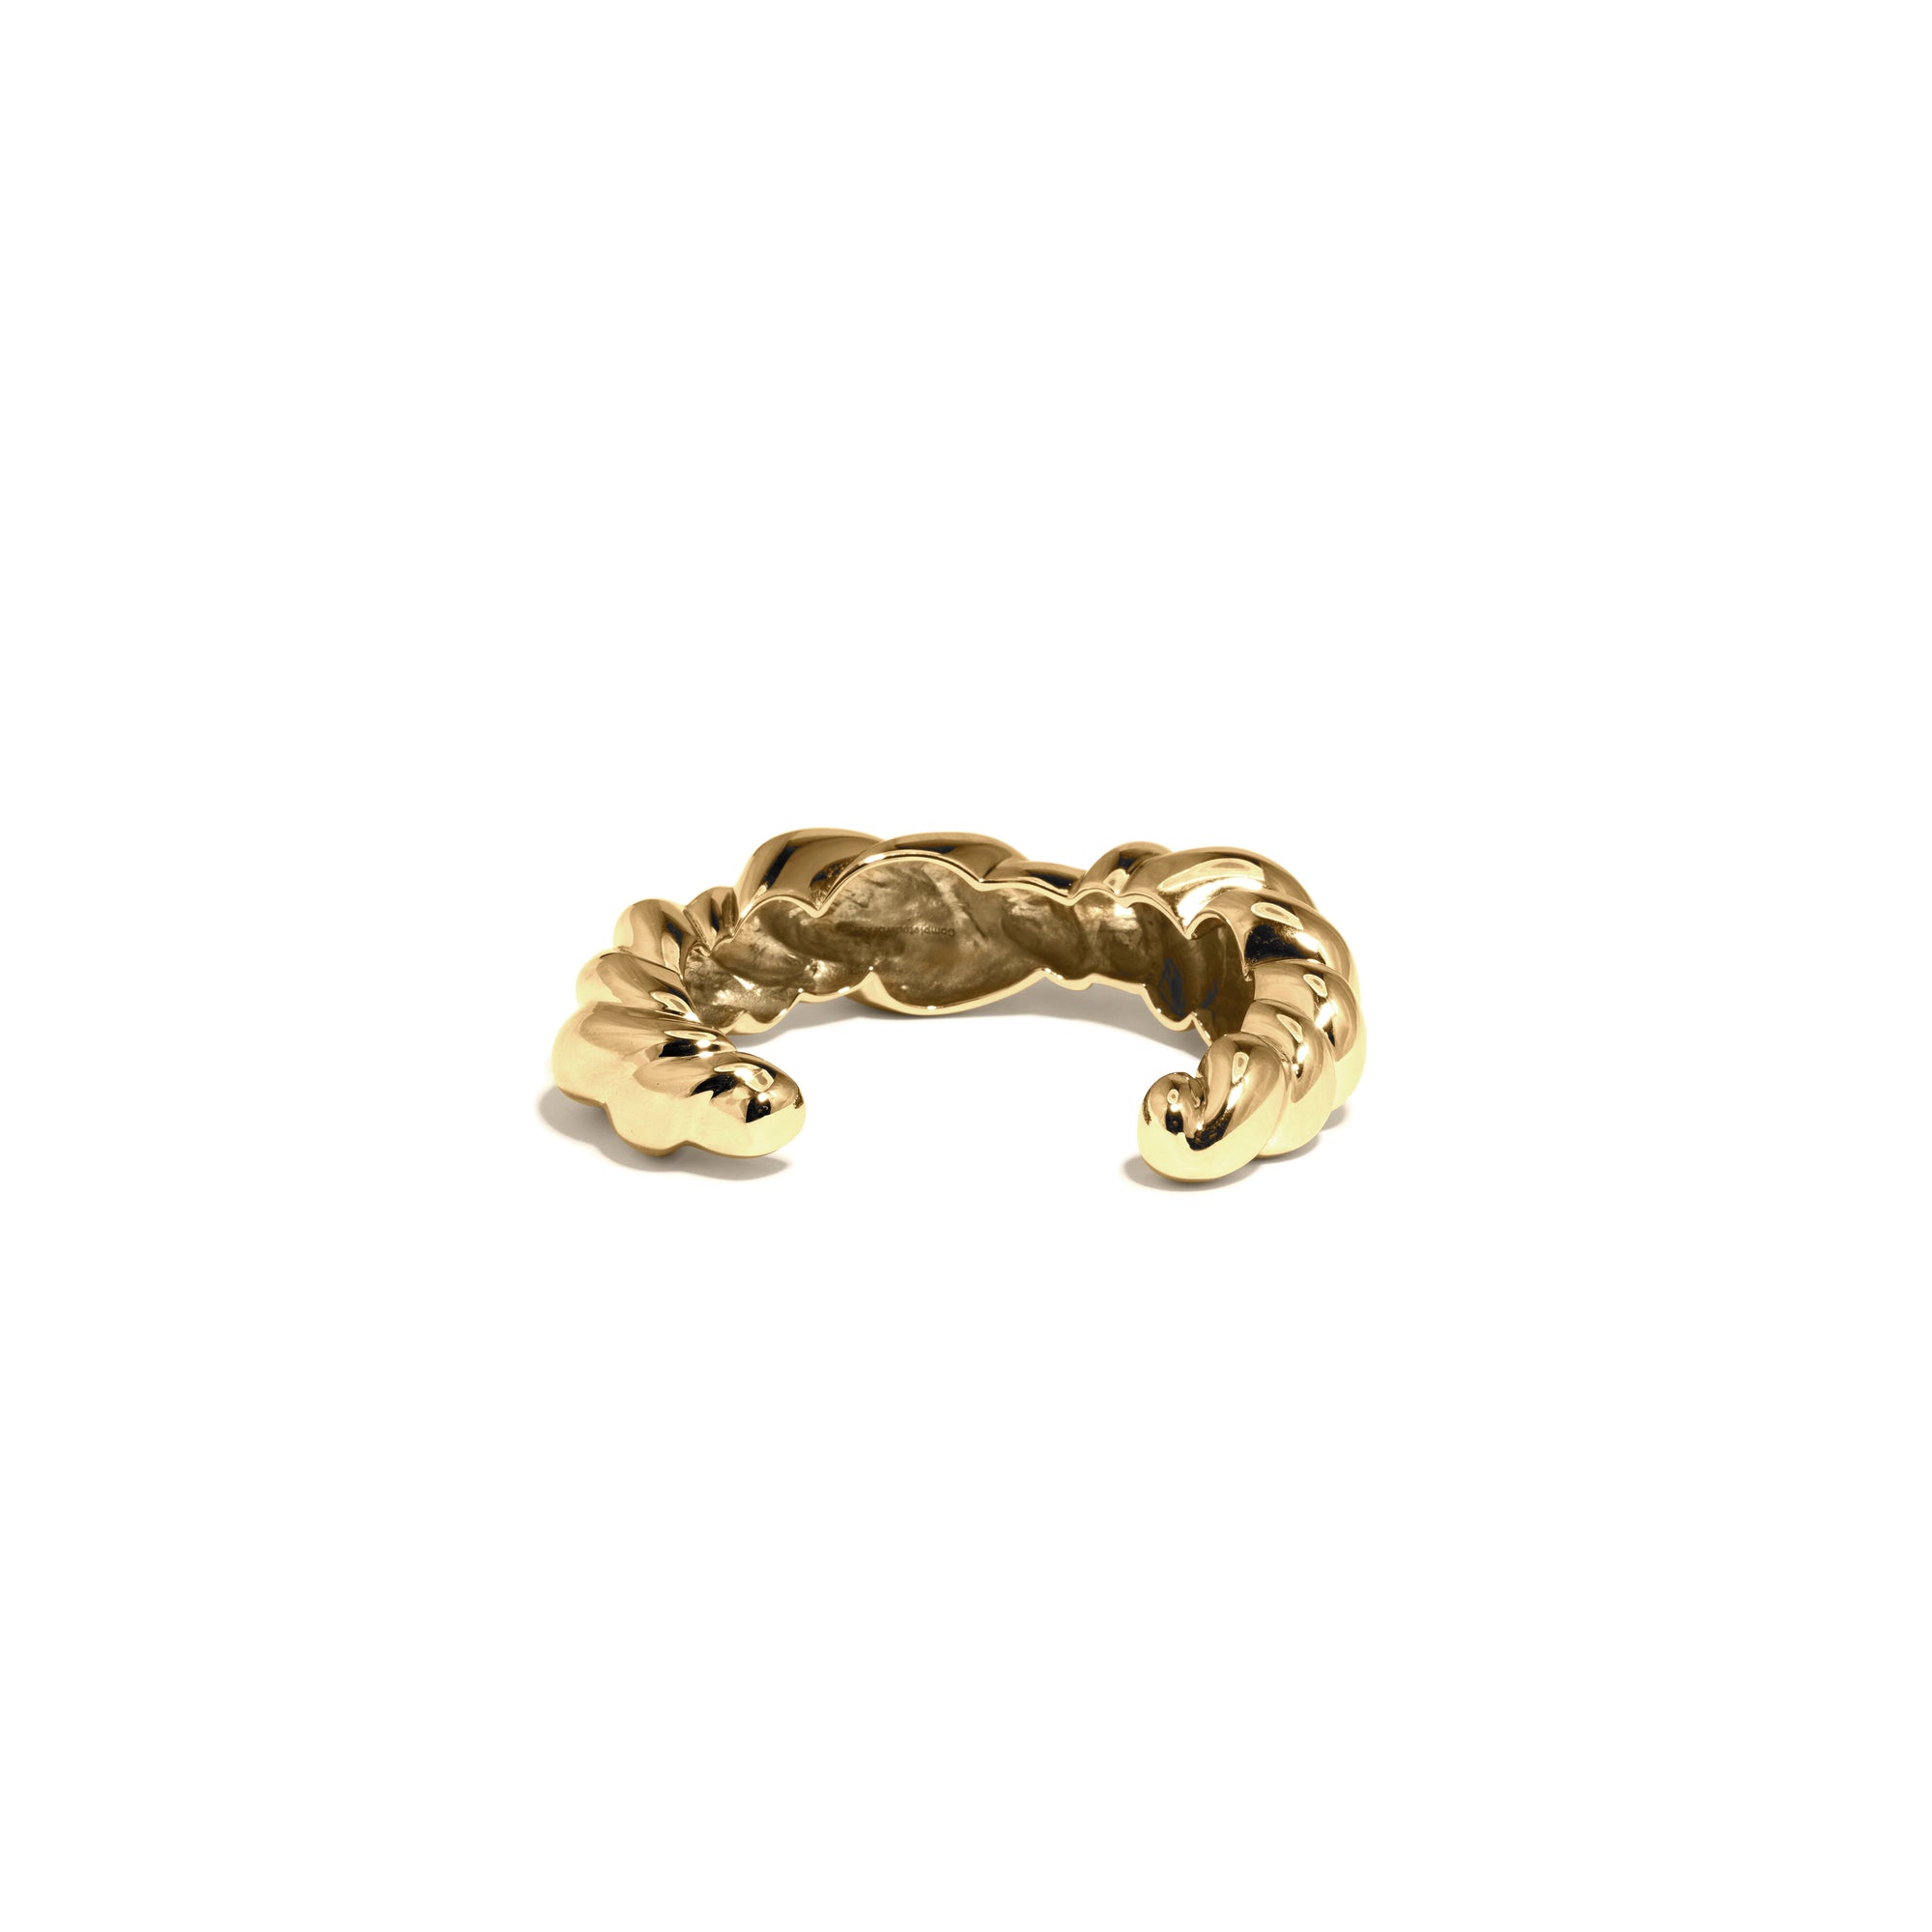 Completedworks - Women's Meandering Bracelet - (Yellow Gold) view 4